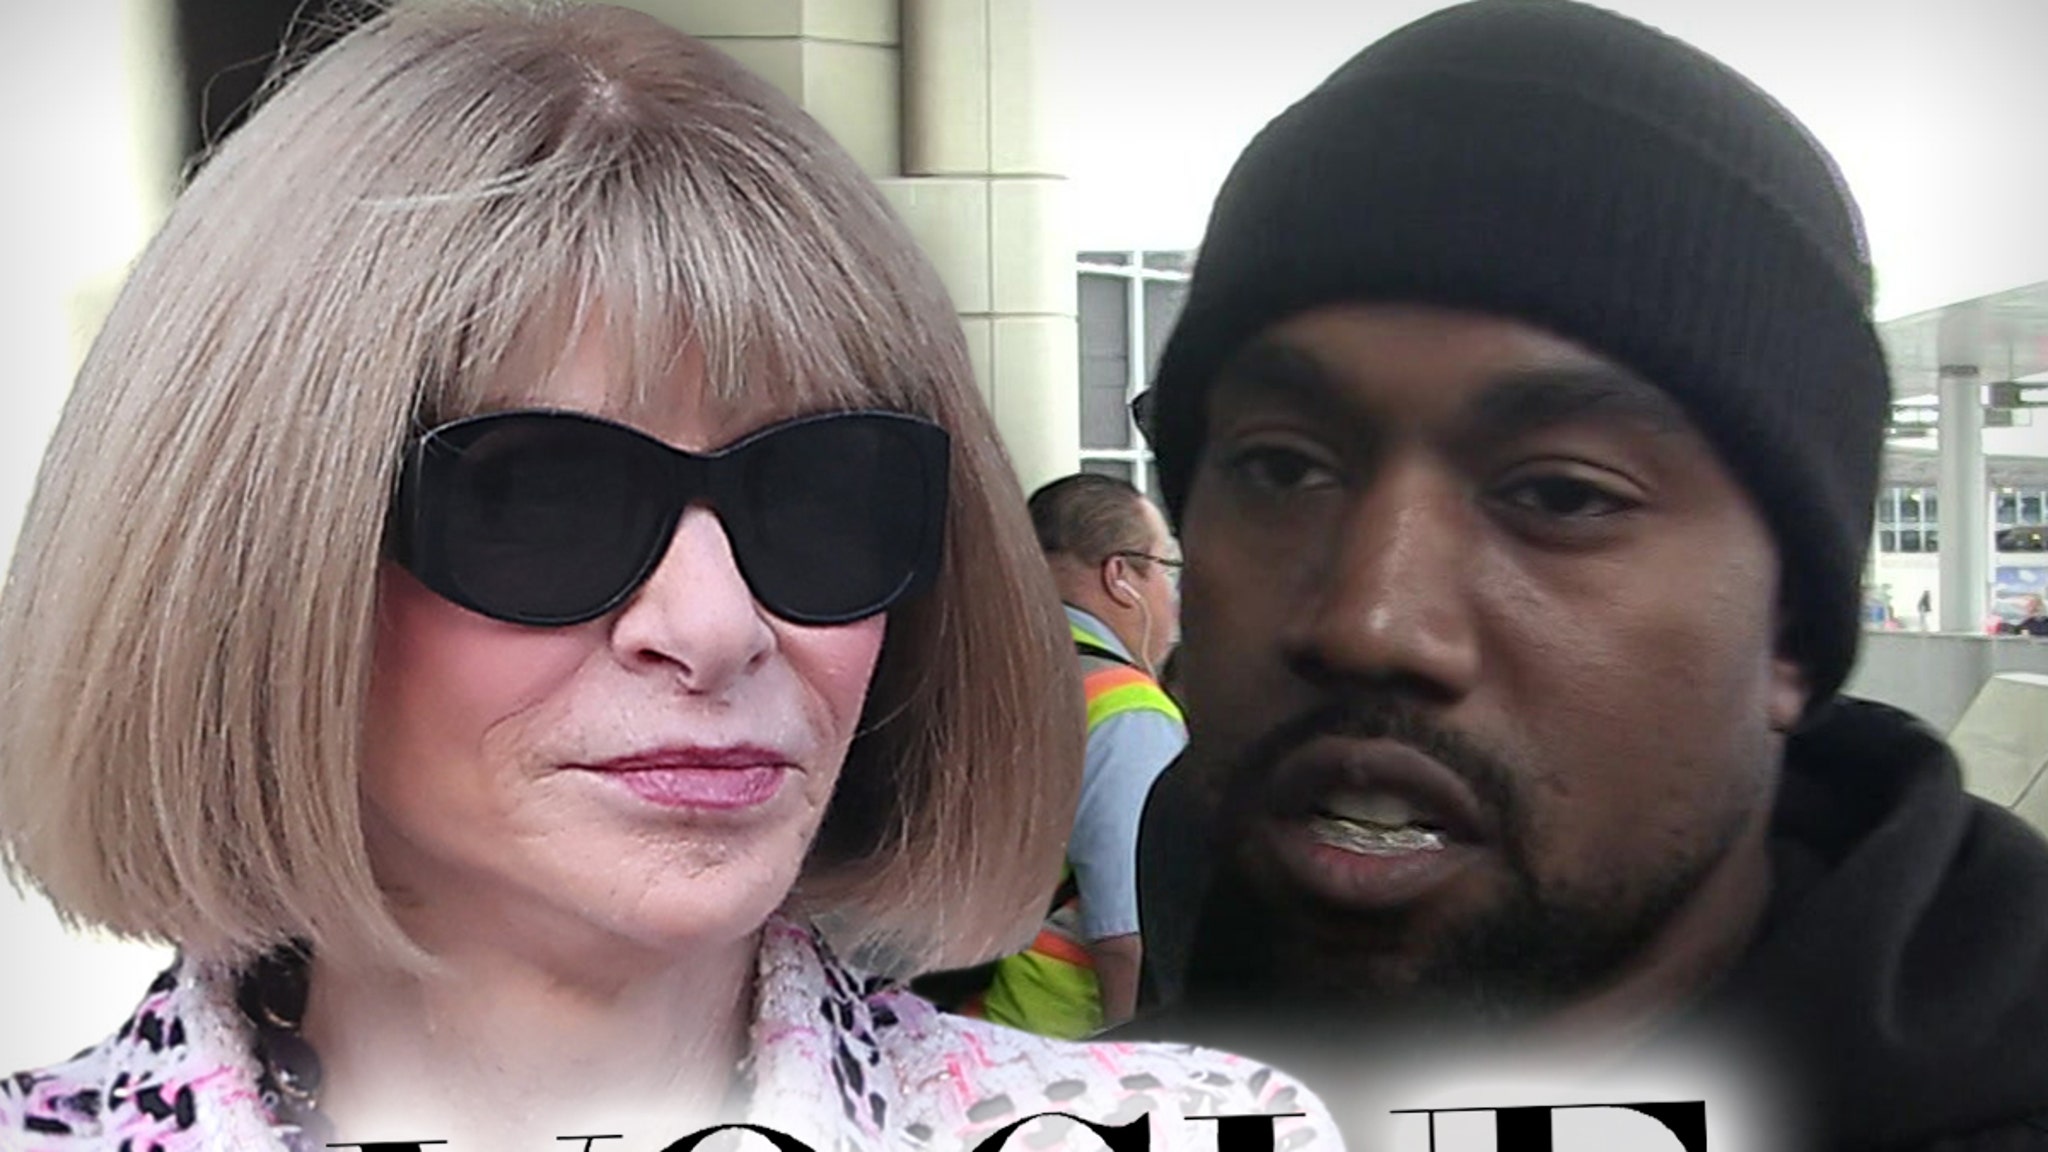 Vogue Head Anna Wintour Severs Ties with Kanye West Amid Outbursts #KanyeWest